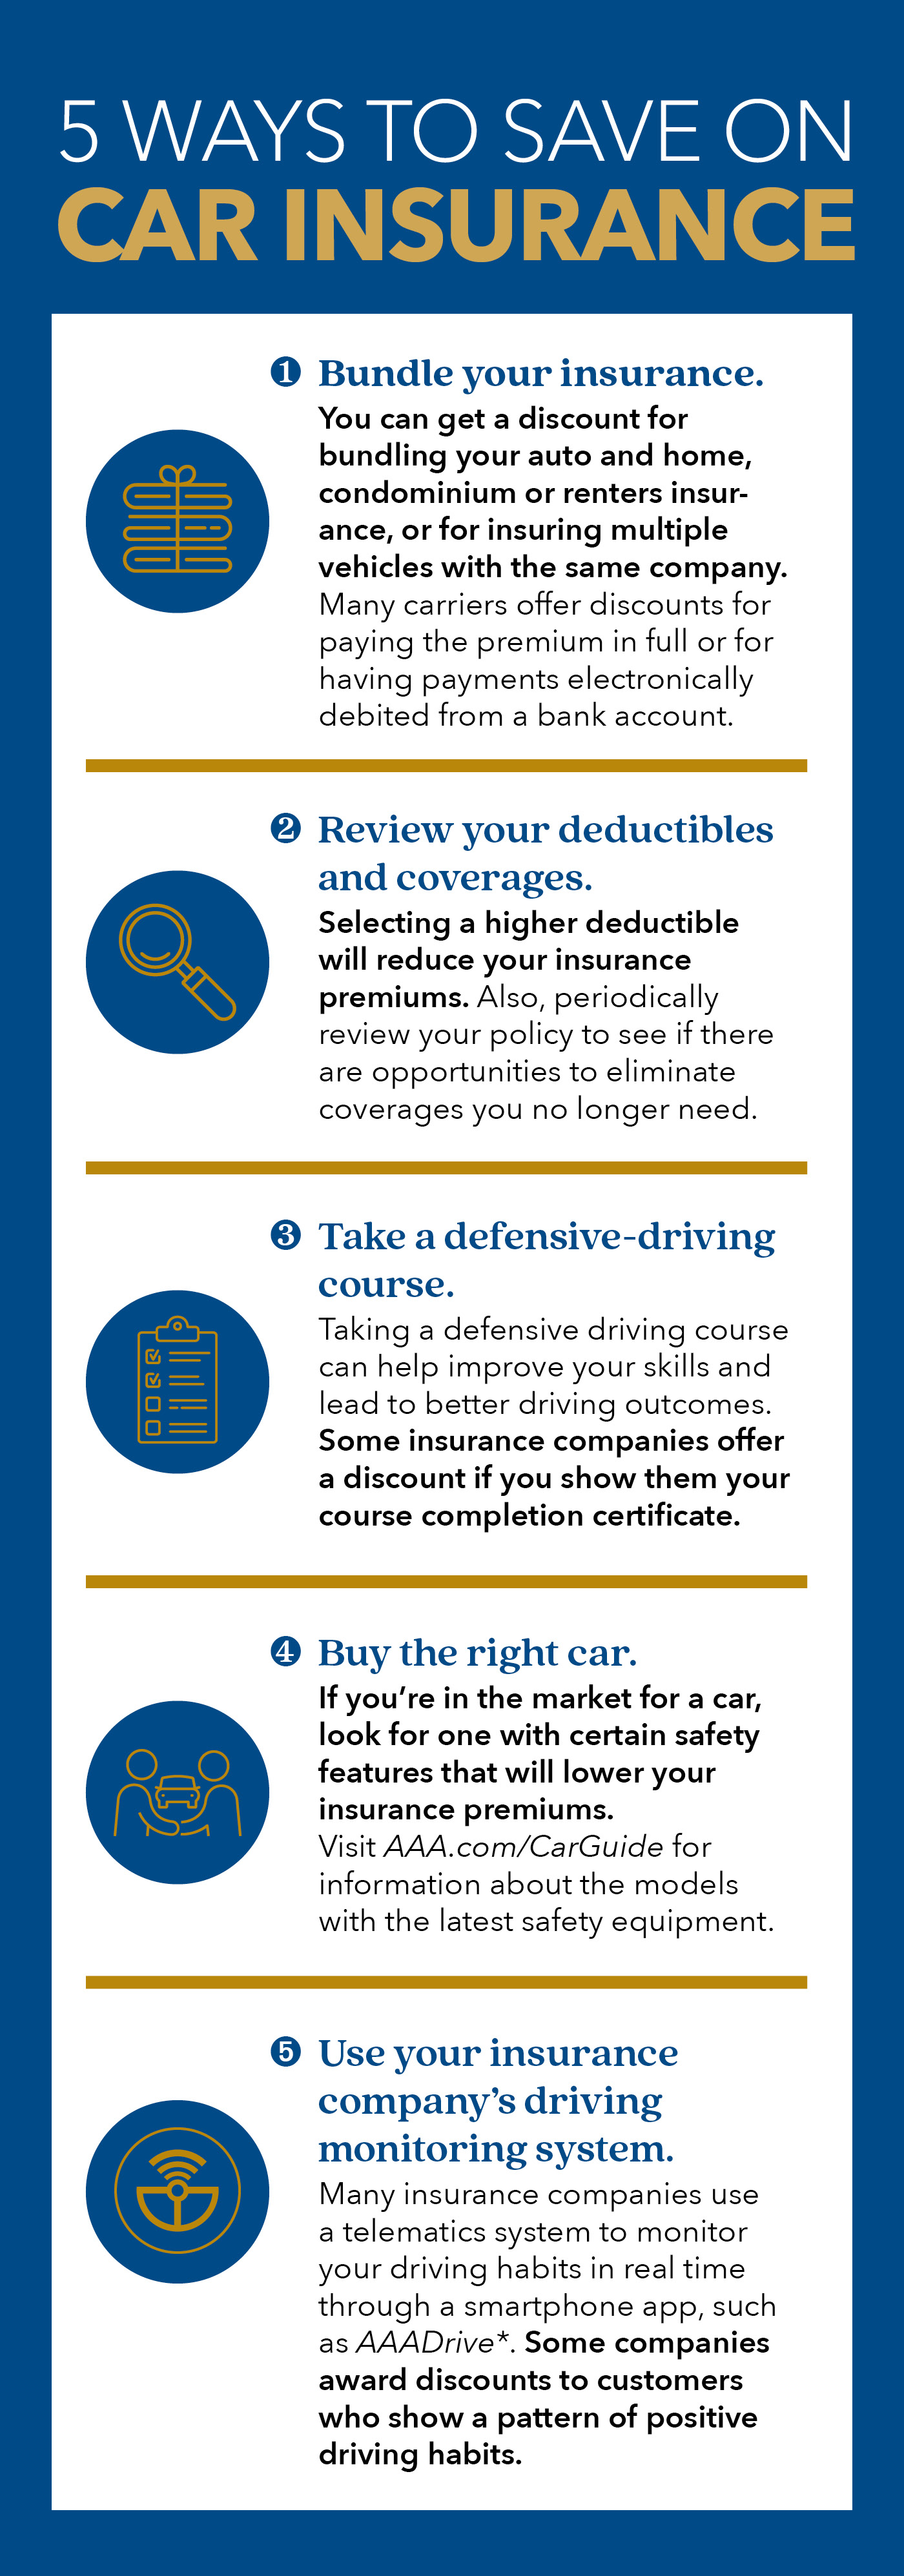 Infographic listing 5 different ways to save on car insurance